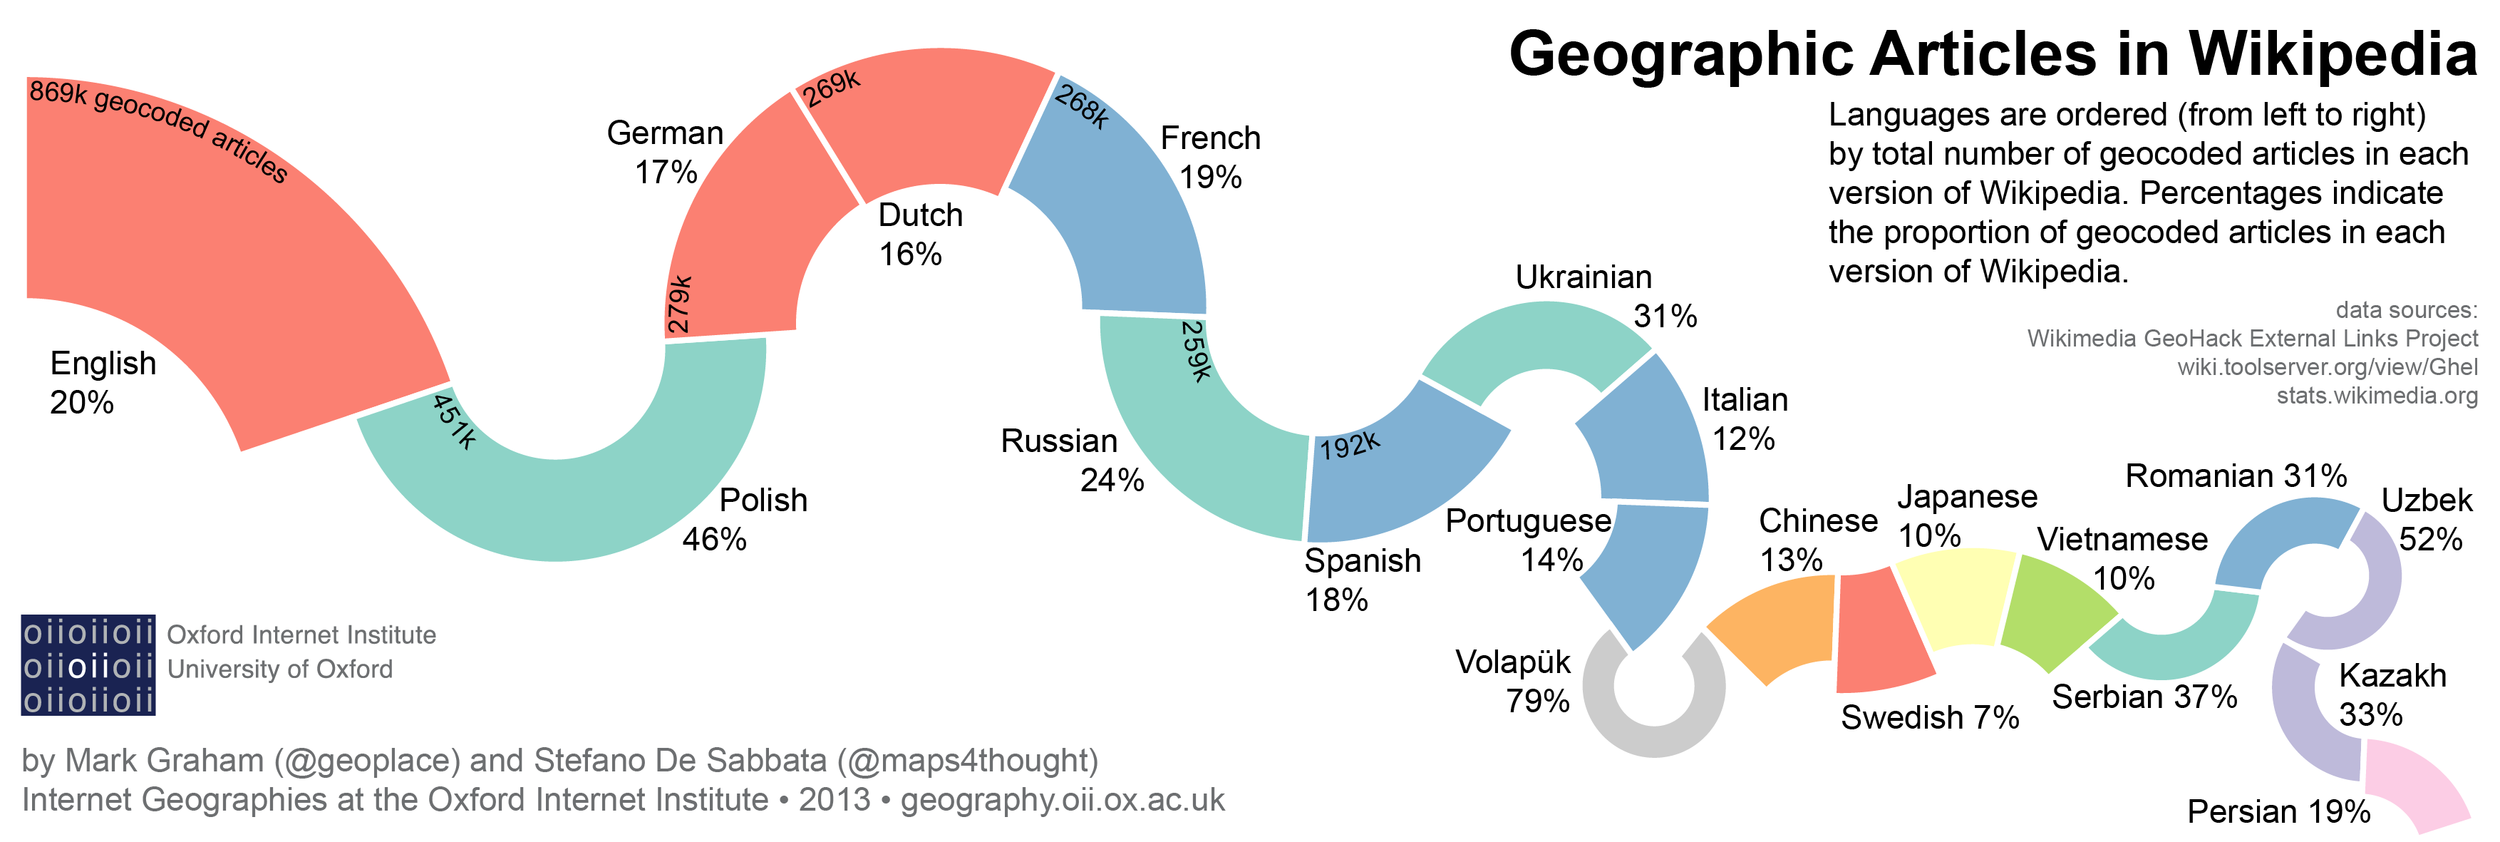 Geographic intersections of languages in Wikipedia